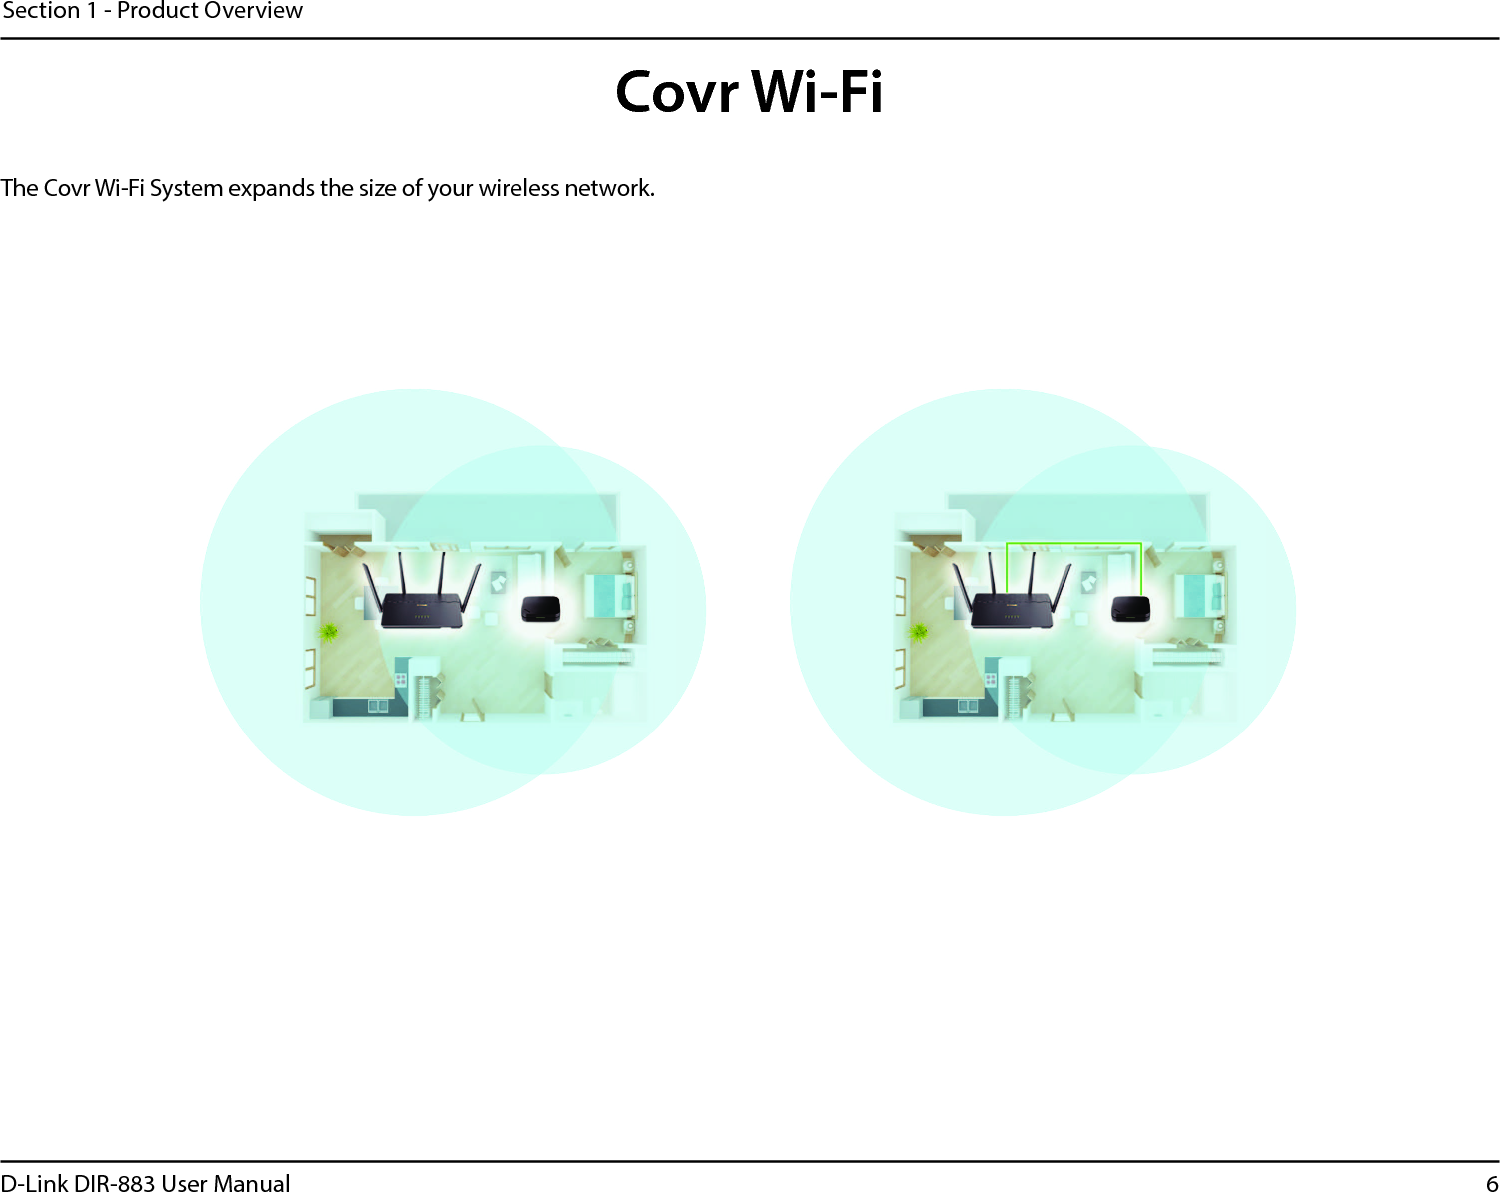 6D-Link DIR-883 User ManualSection 1 - Product OverviewCovr Wi-FiThe Covr Wi-Fi System expands the size of your wireless network.